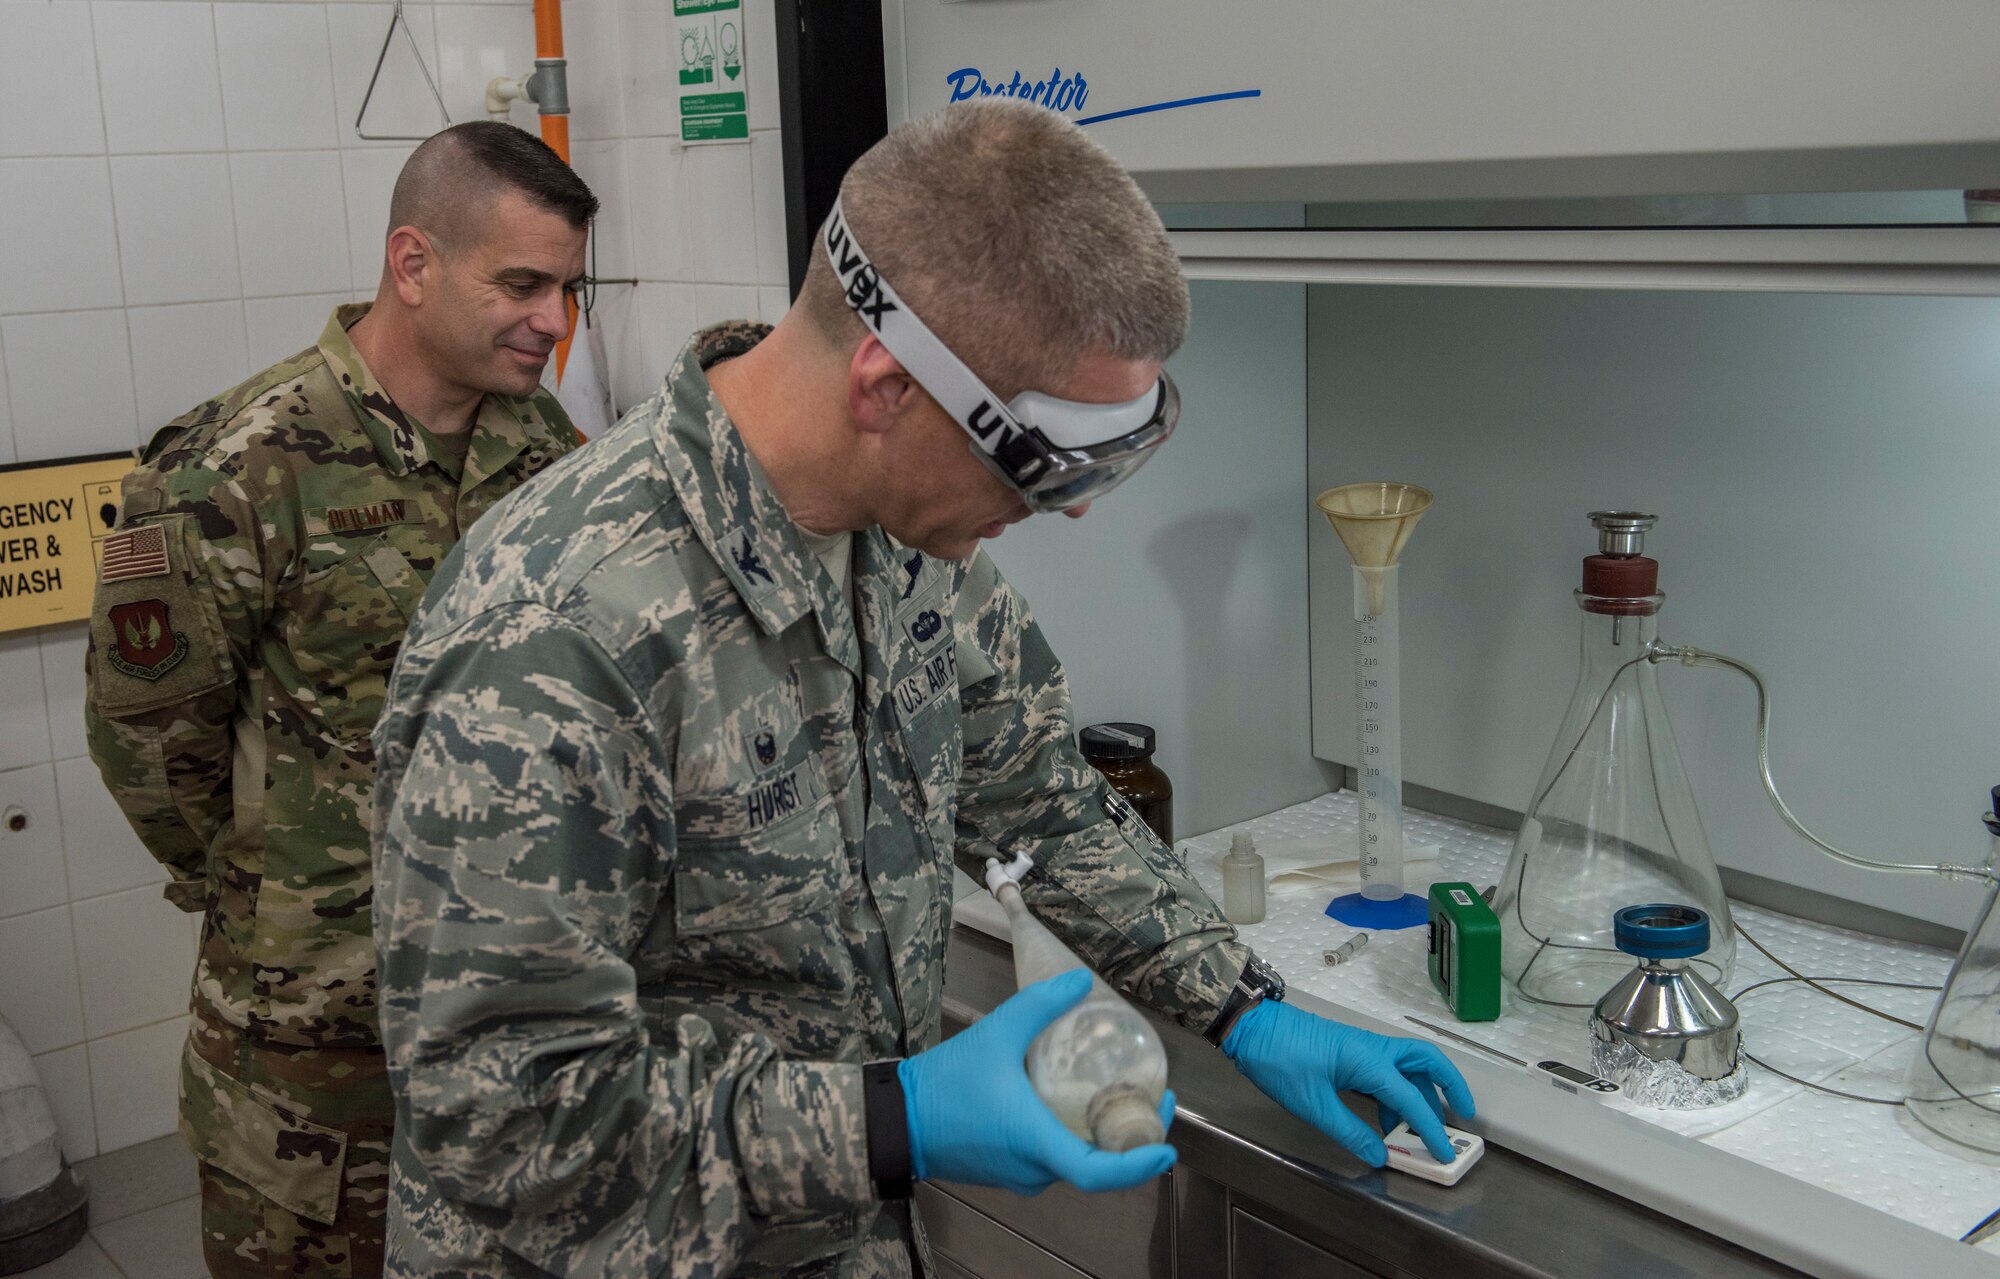 39th Air Base Wing commander and command chief participate in a fuel inspection with lab technicians.